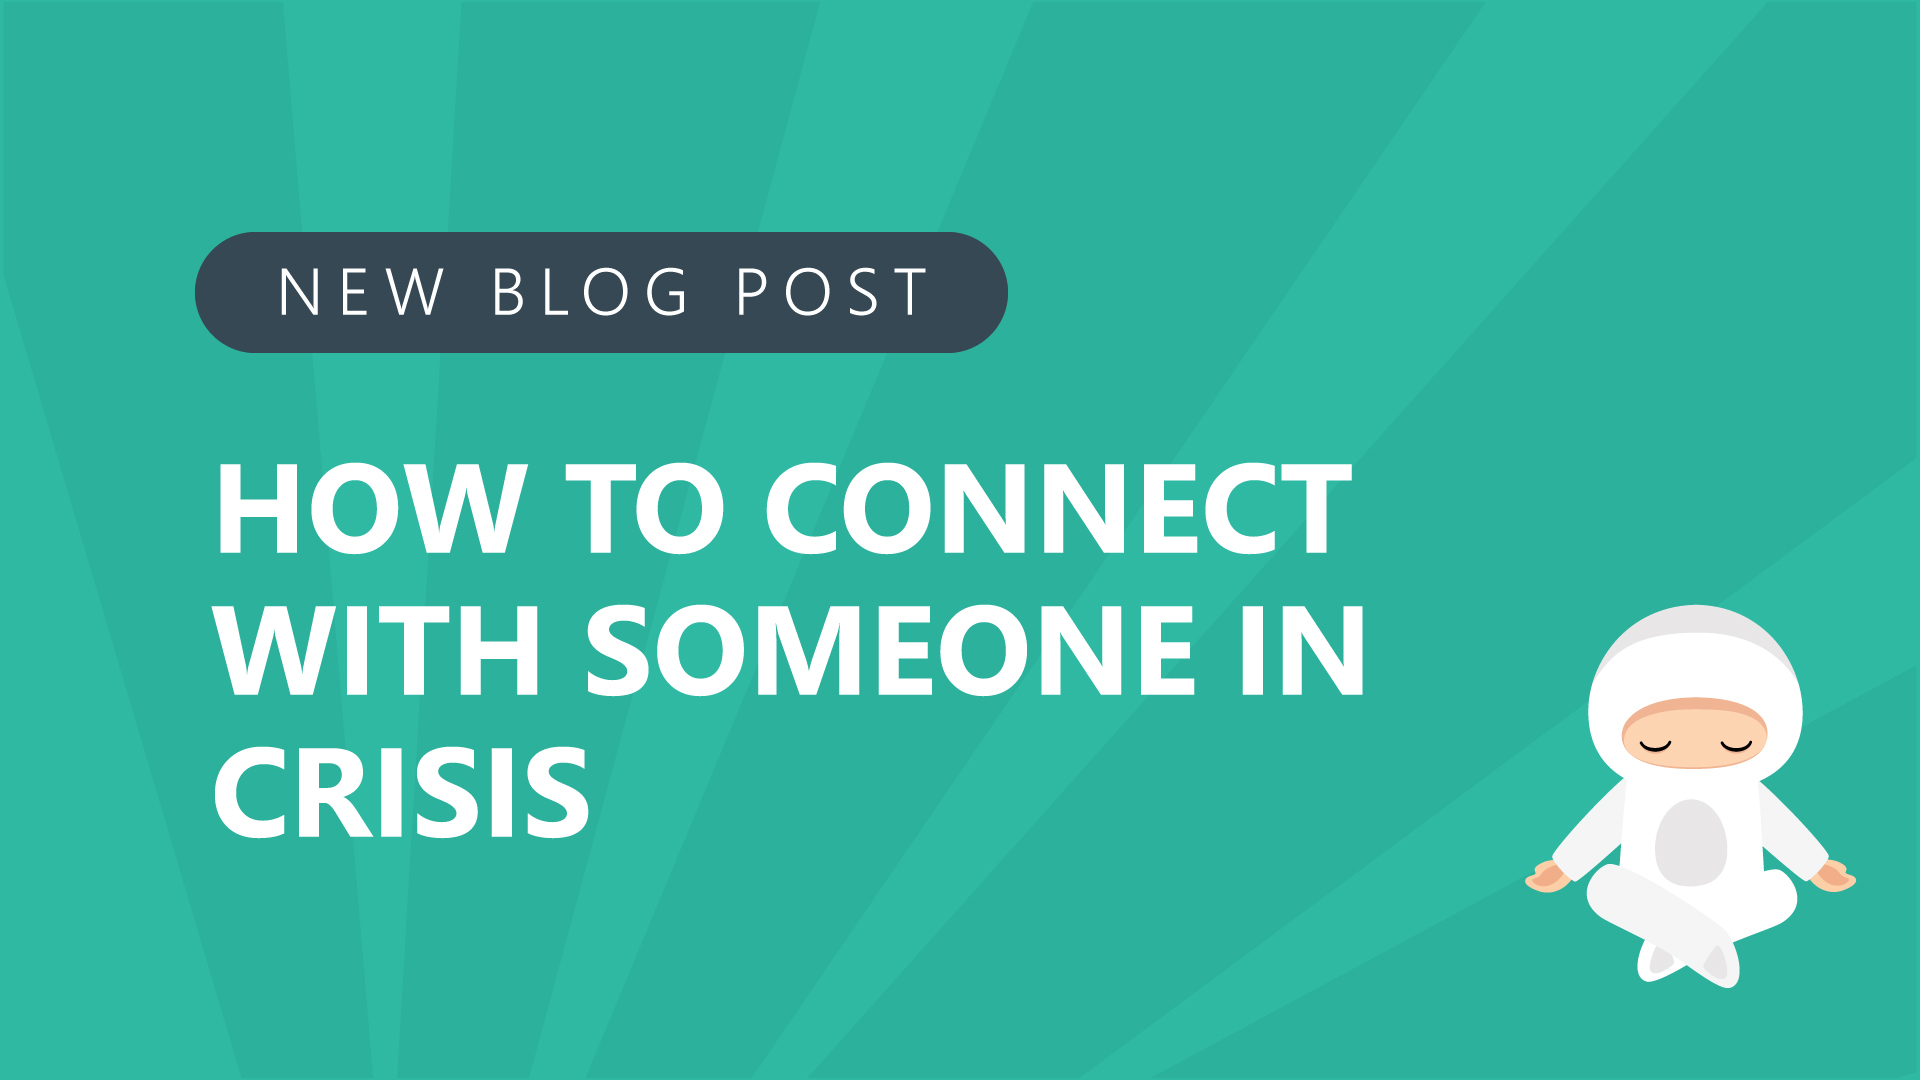 51-How-to-Connect-with-Someone-in-Crisis.jpg